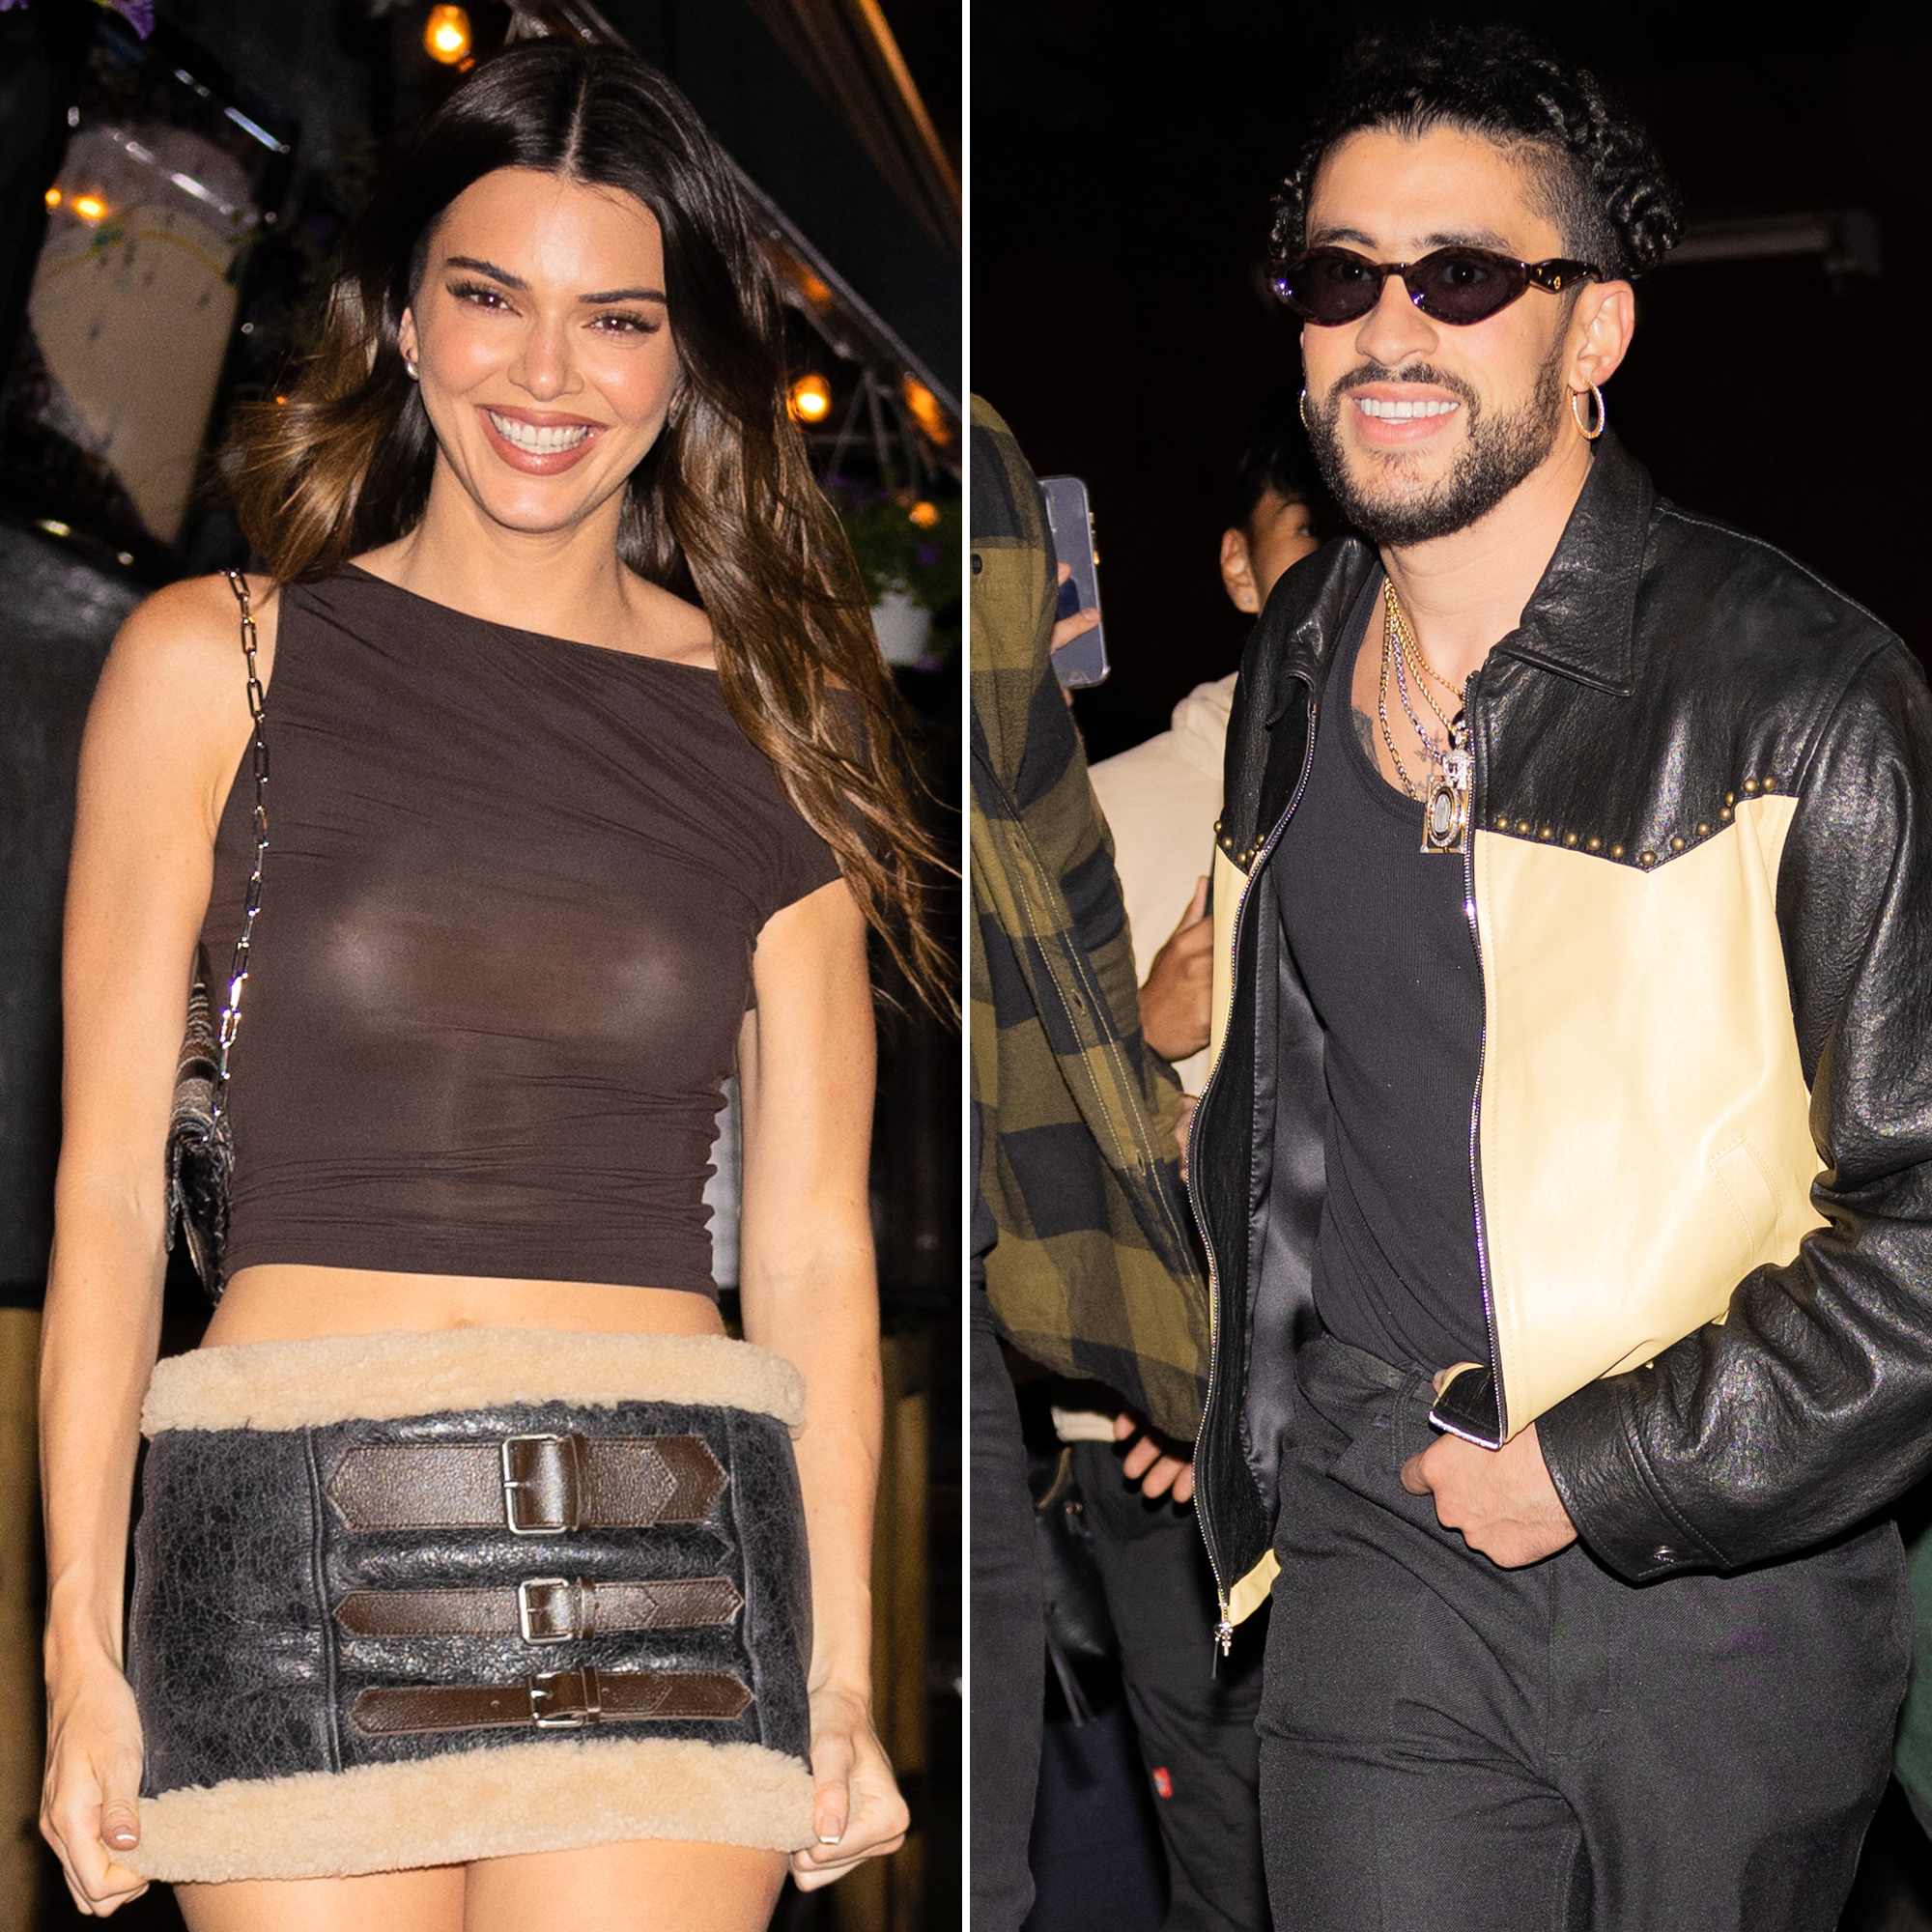 Kendall Jenner and boyfriend Bad Bunny seen on romantic date night at  upscale NYC restaurant in rare new photos together